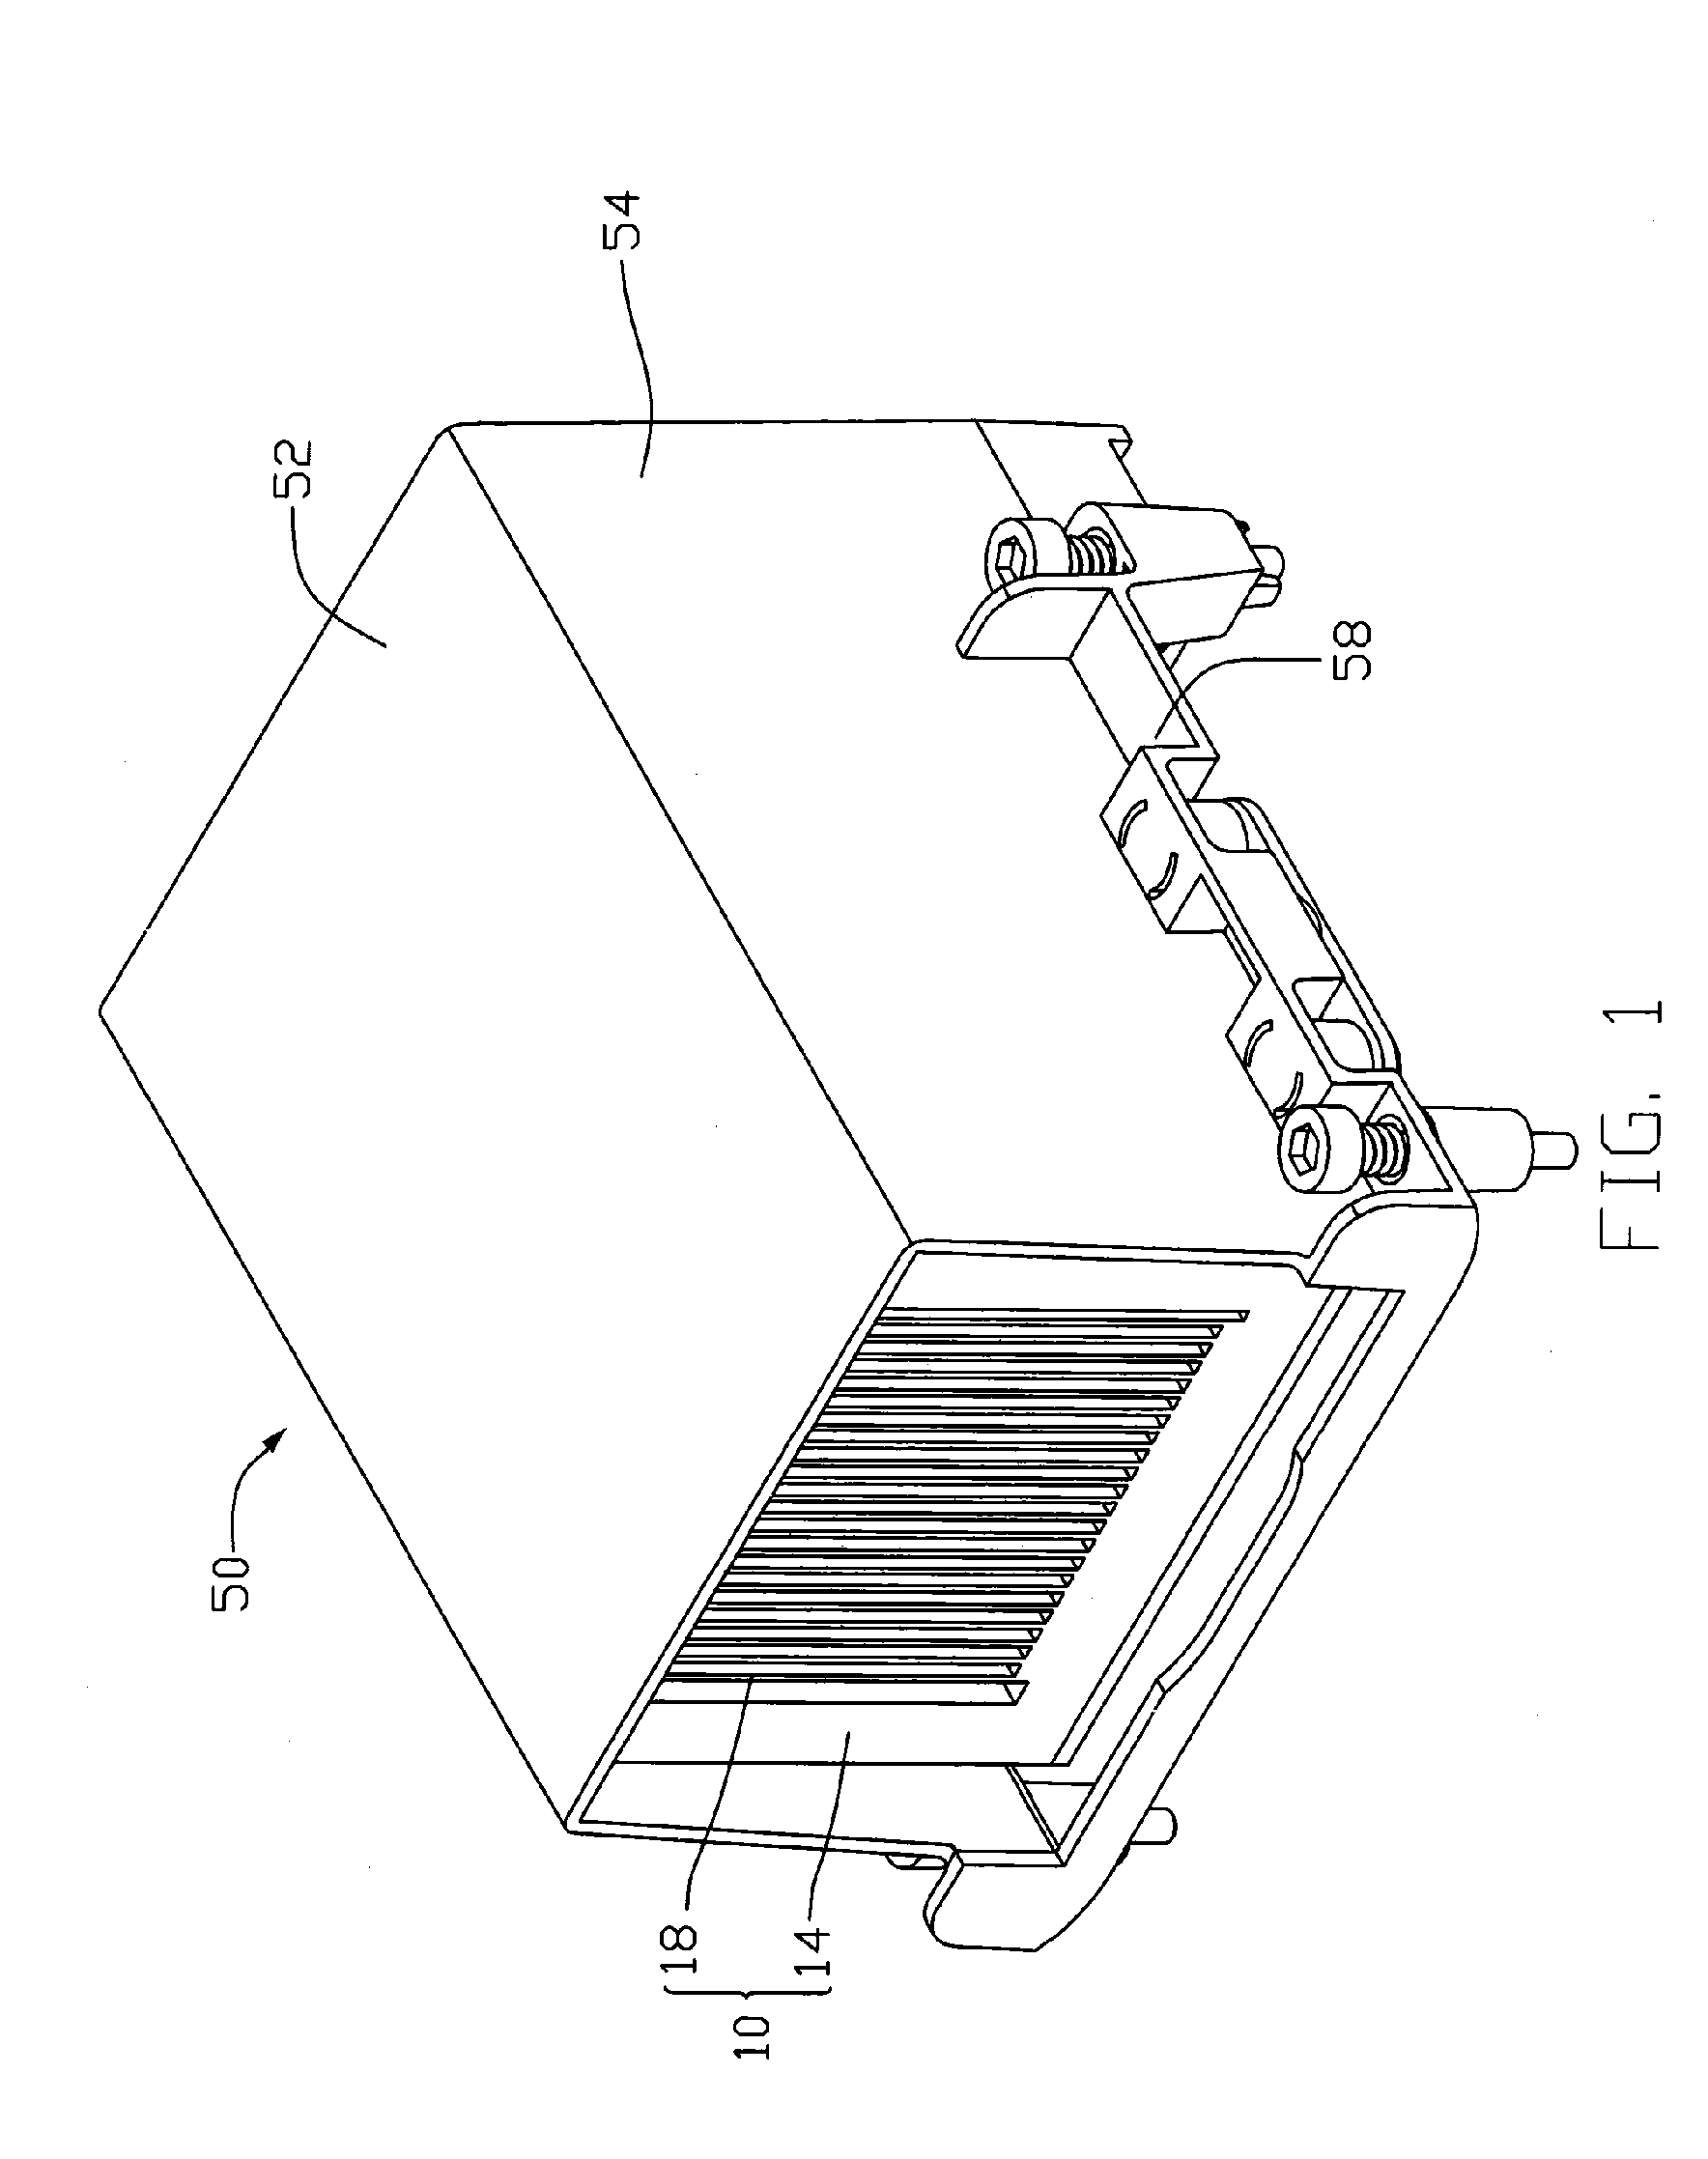 Cooling device incorporating boiling chamber